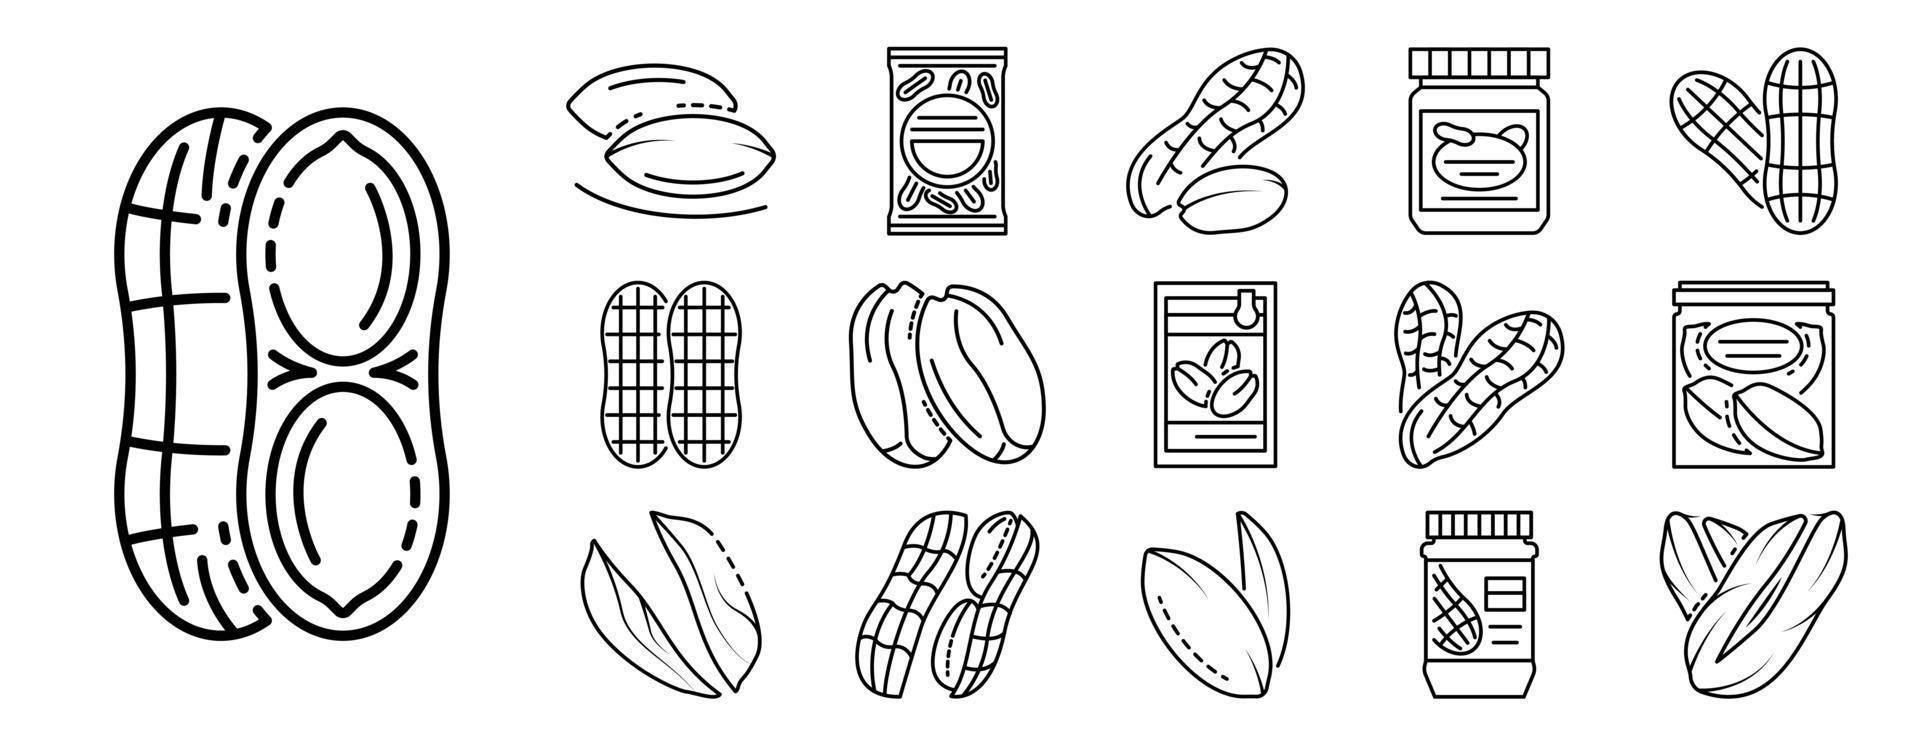 Peanut icon set, outline style vector